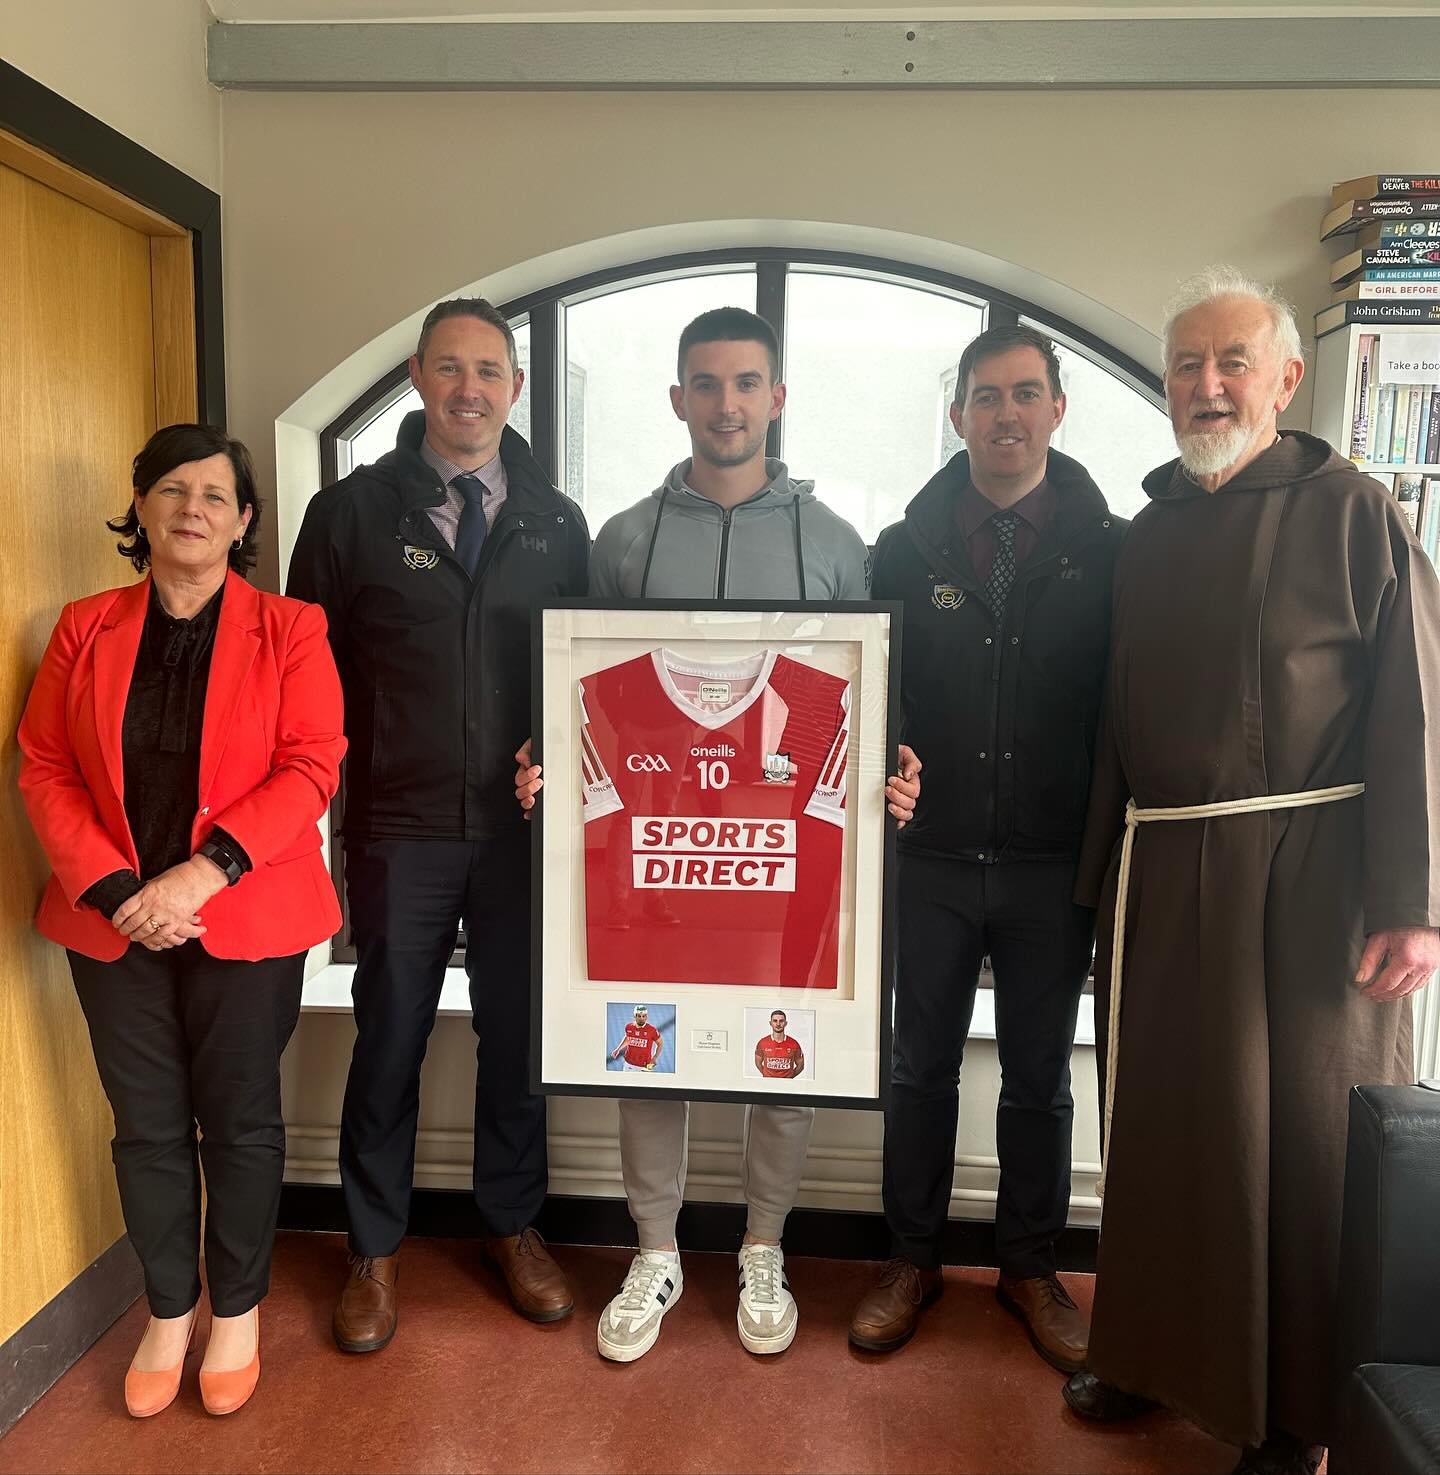 We were delighted to have past pupil Shane Kingston in today to present his Cork Jersey for our Sporting Wall of Fame. We are starting a past-pupil Wall of Fame over the coming months to celebrate the sporting success of our past pupils! A huge thank